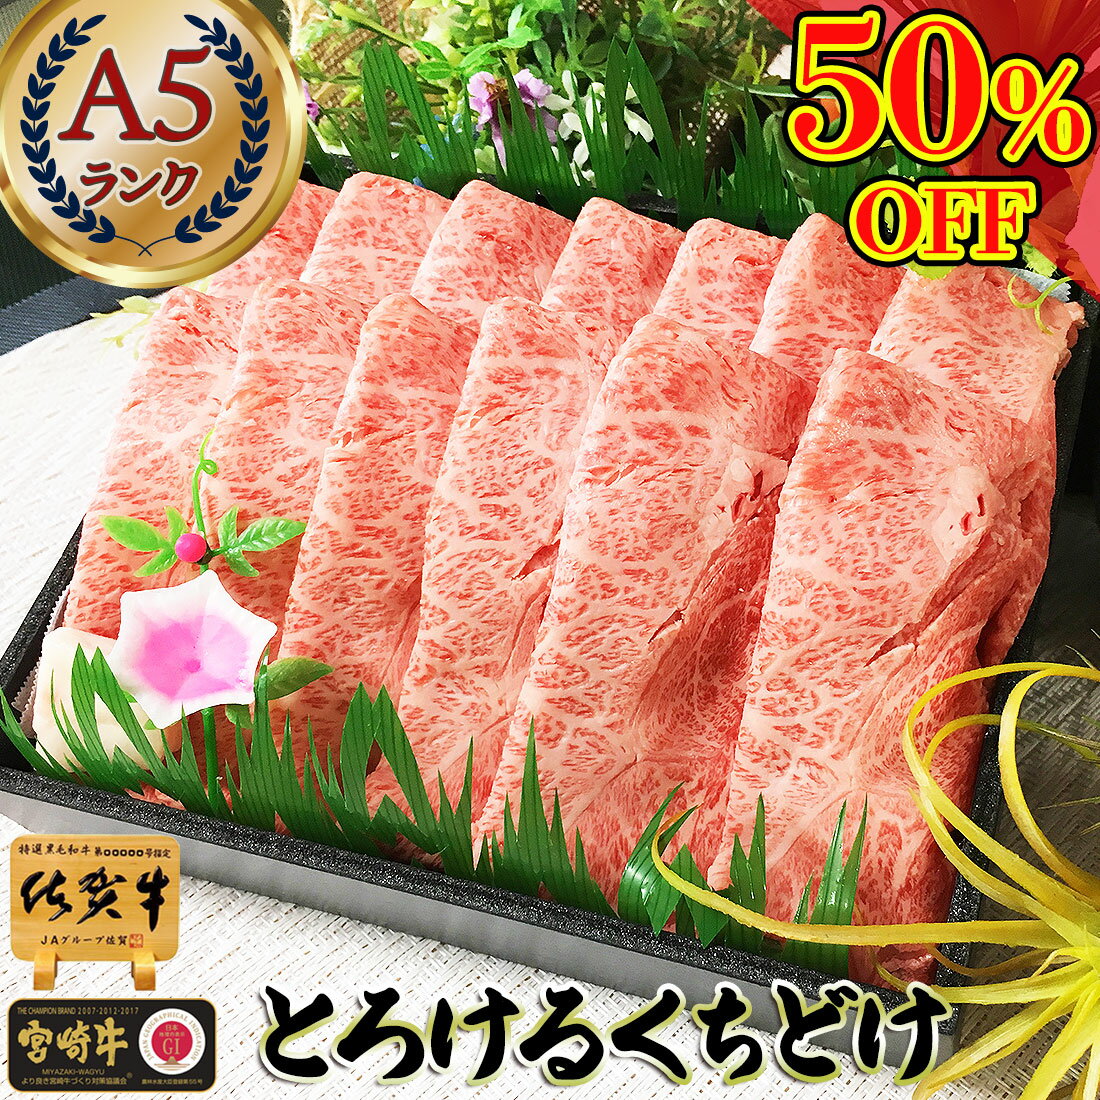 ＼50％OFF／ 最高級 A5 ギフト 肉 黒毛